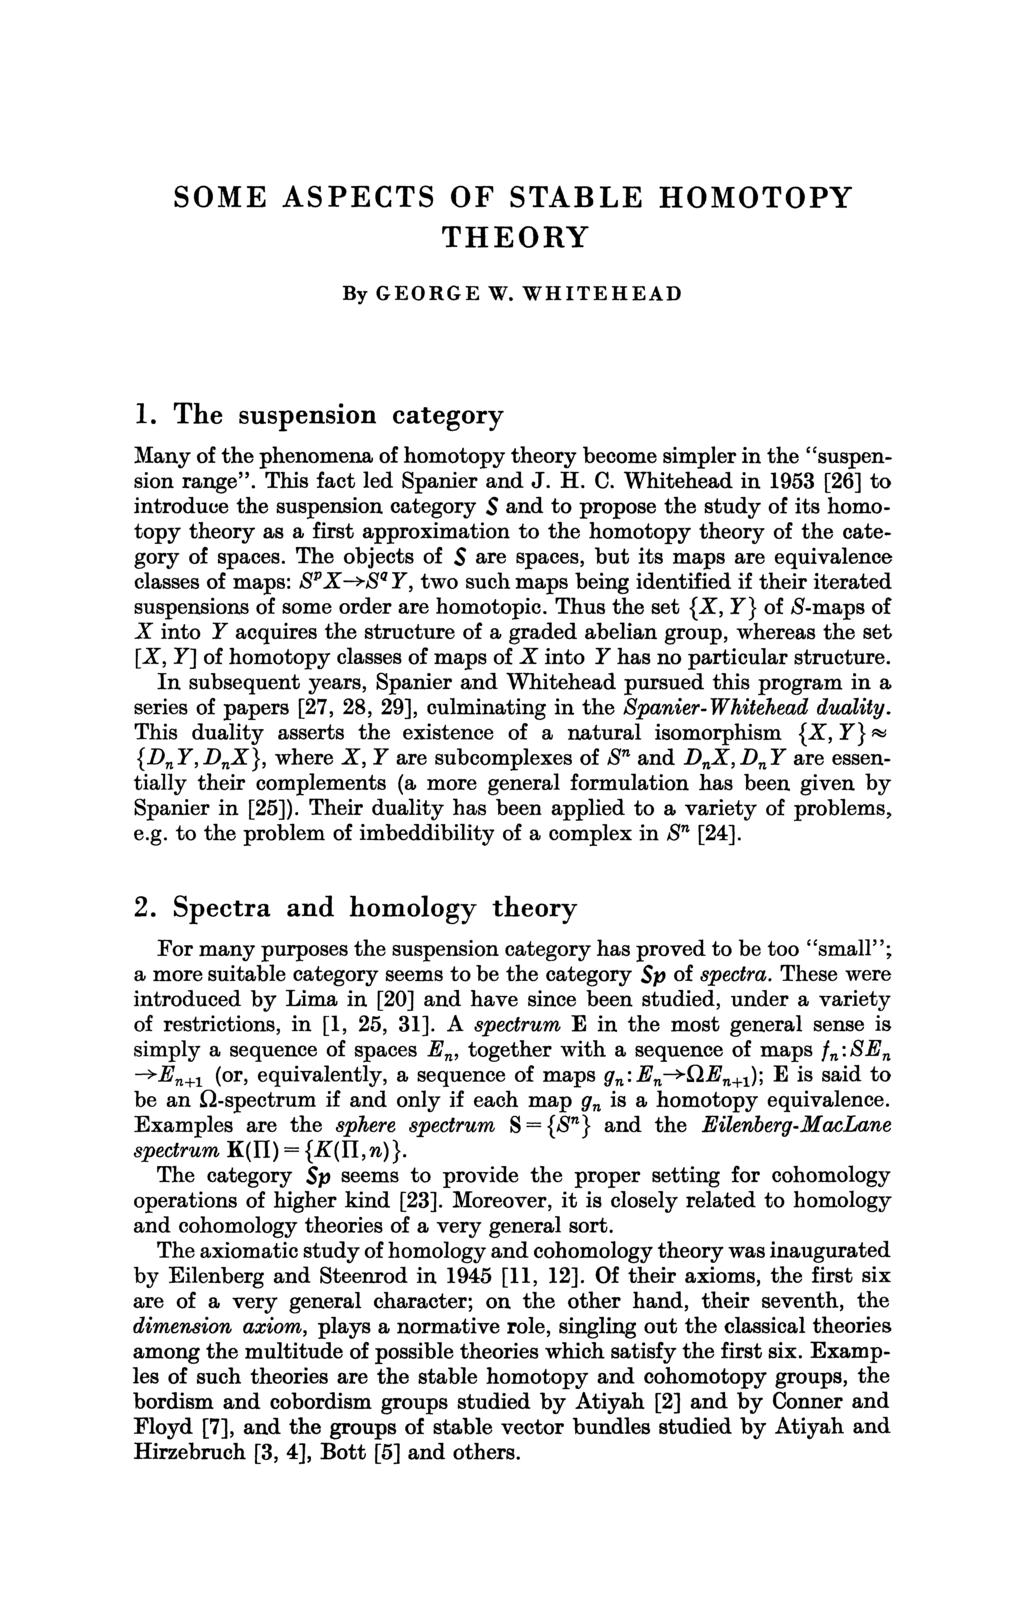 SOME ASPECTS OF STABLE HOMOTOPY THEORY By GEORGE W. WHITEHEAD 1. The suspension category Many of the phenomena of homotopy theory become simpler in the "suspension range". This fact led Spanier and J.